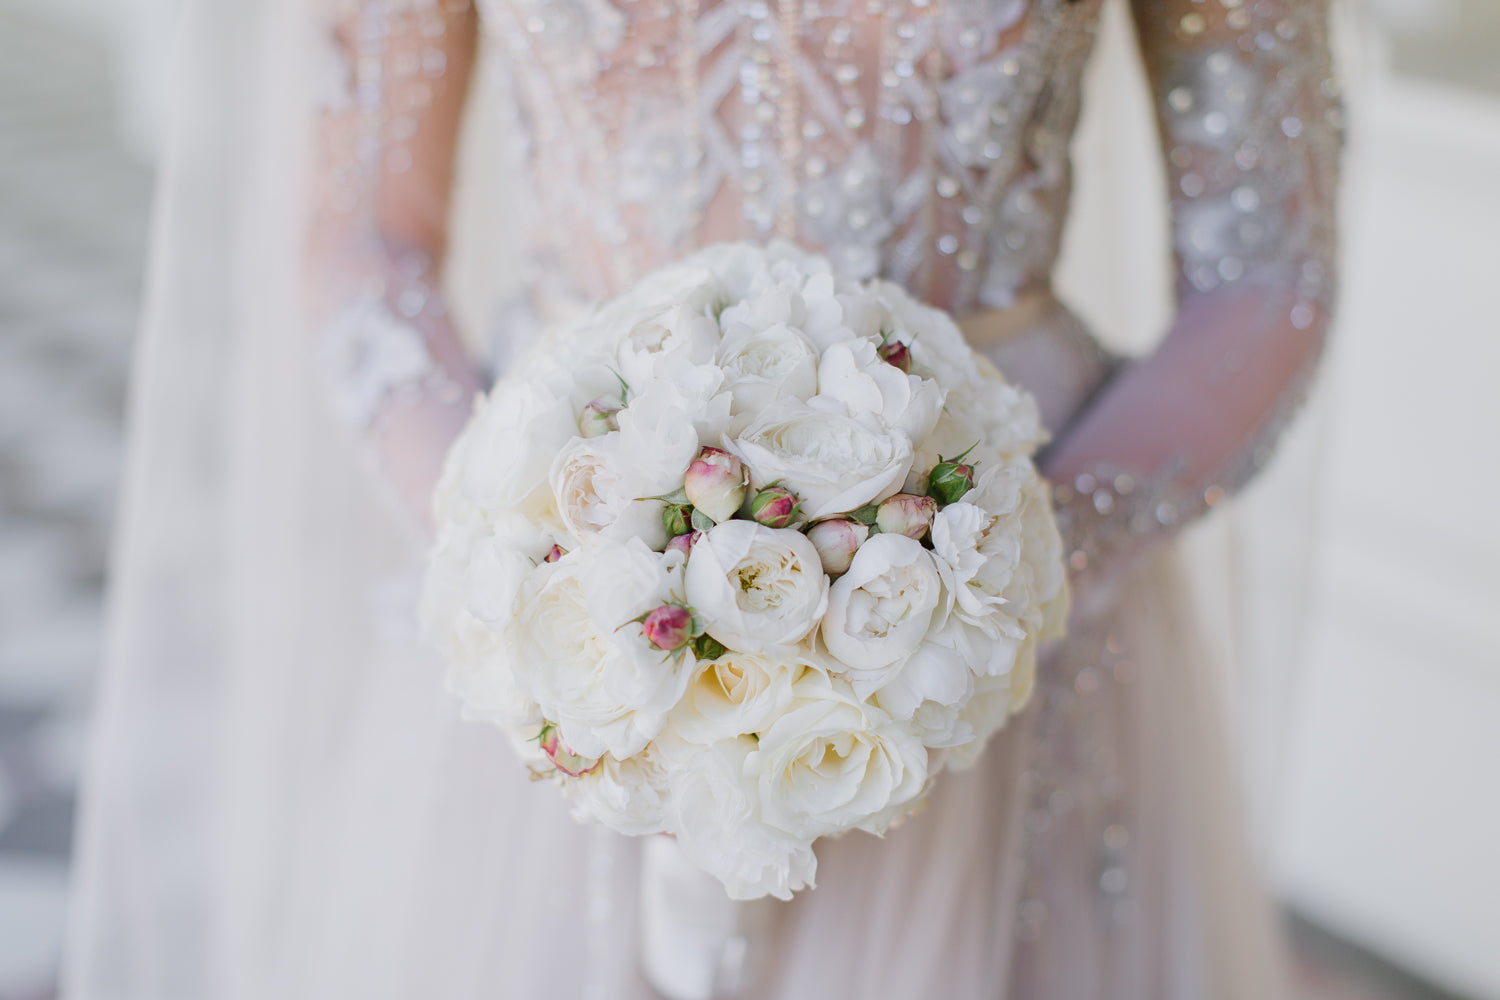 Bride holding bouquet of white wedding flowers